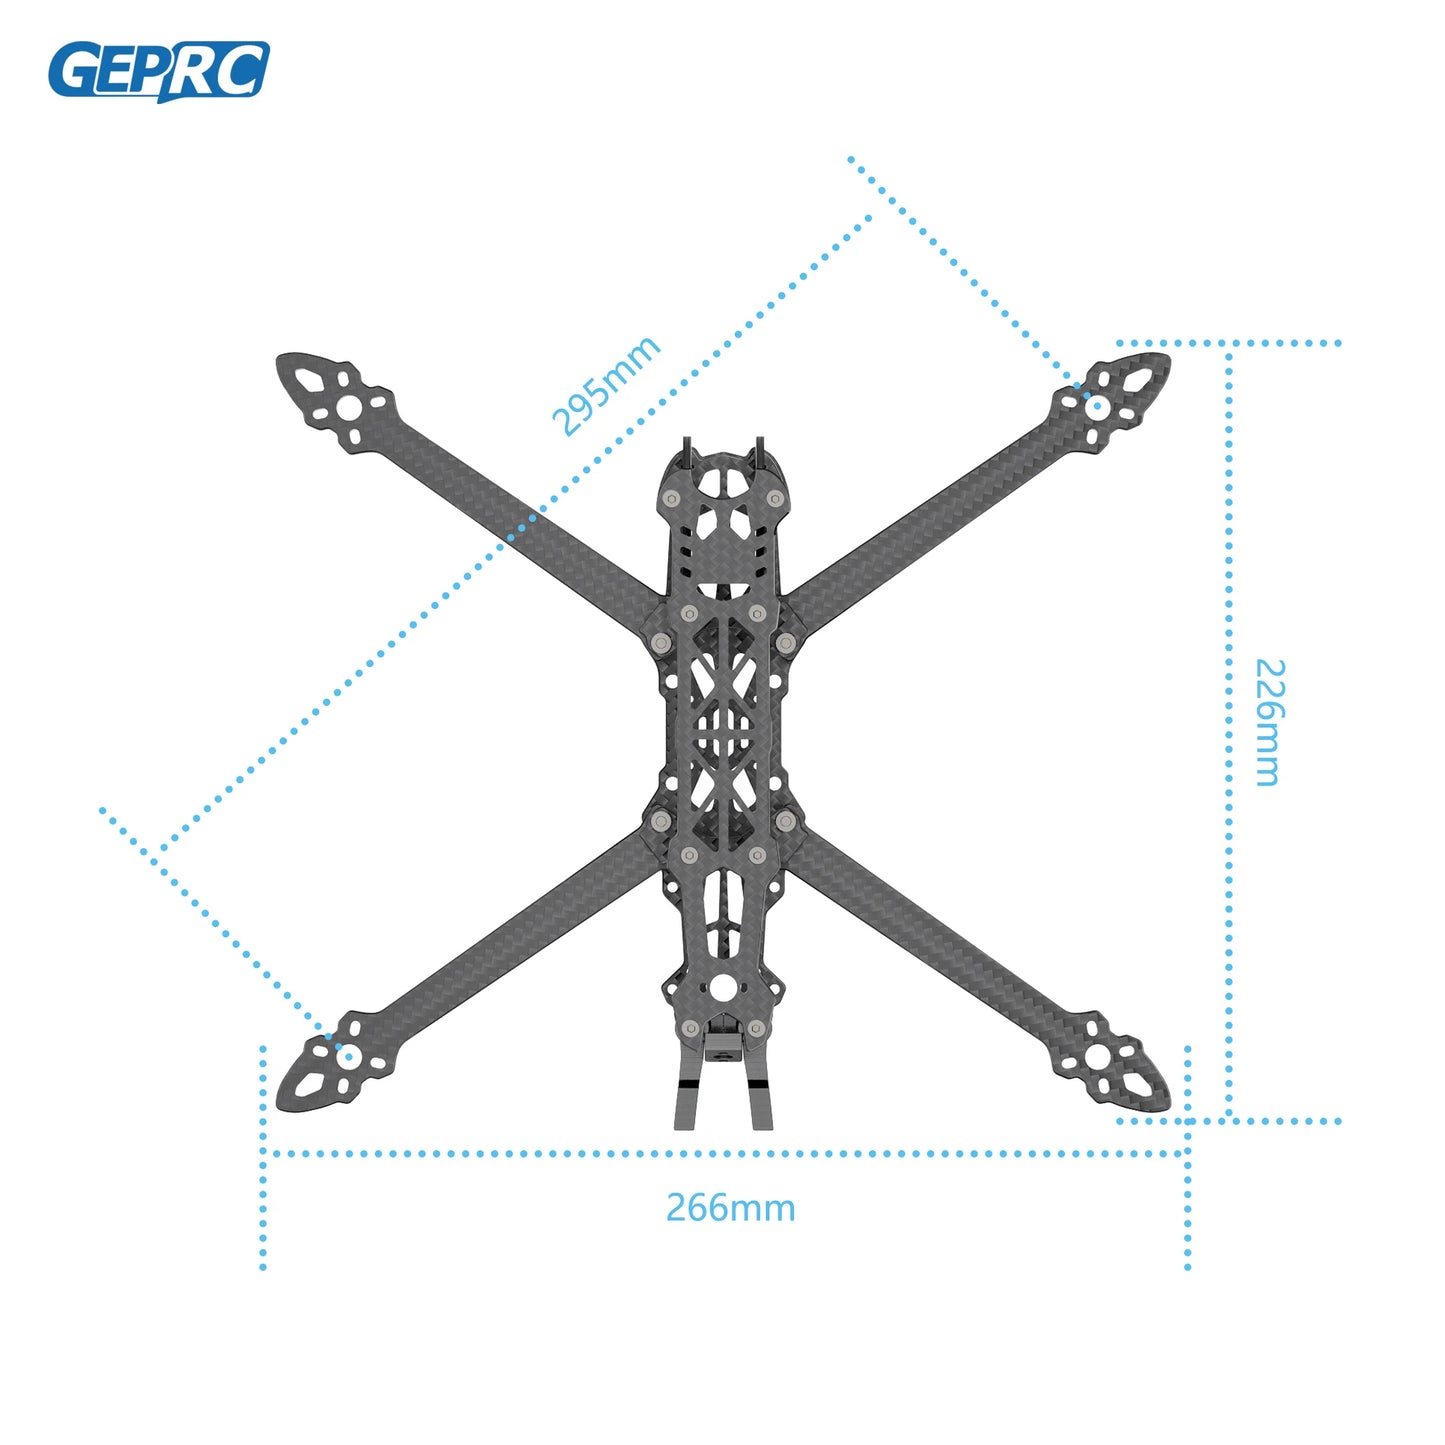 GEPRC GEP-Mark4-7 Frame - 7Inch Parts Propeller Accessory Base Quadcopter FPV Freestyle RC Racing Drone Long Haul Flight